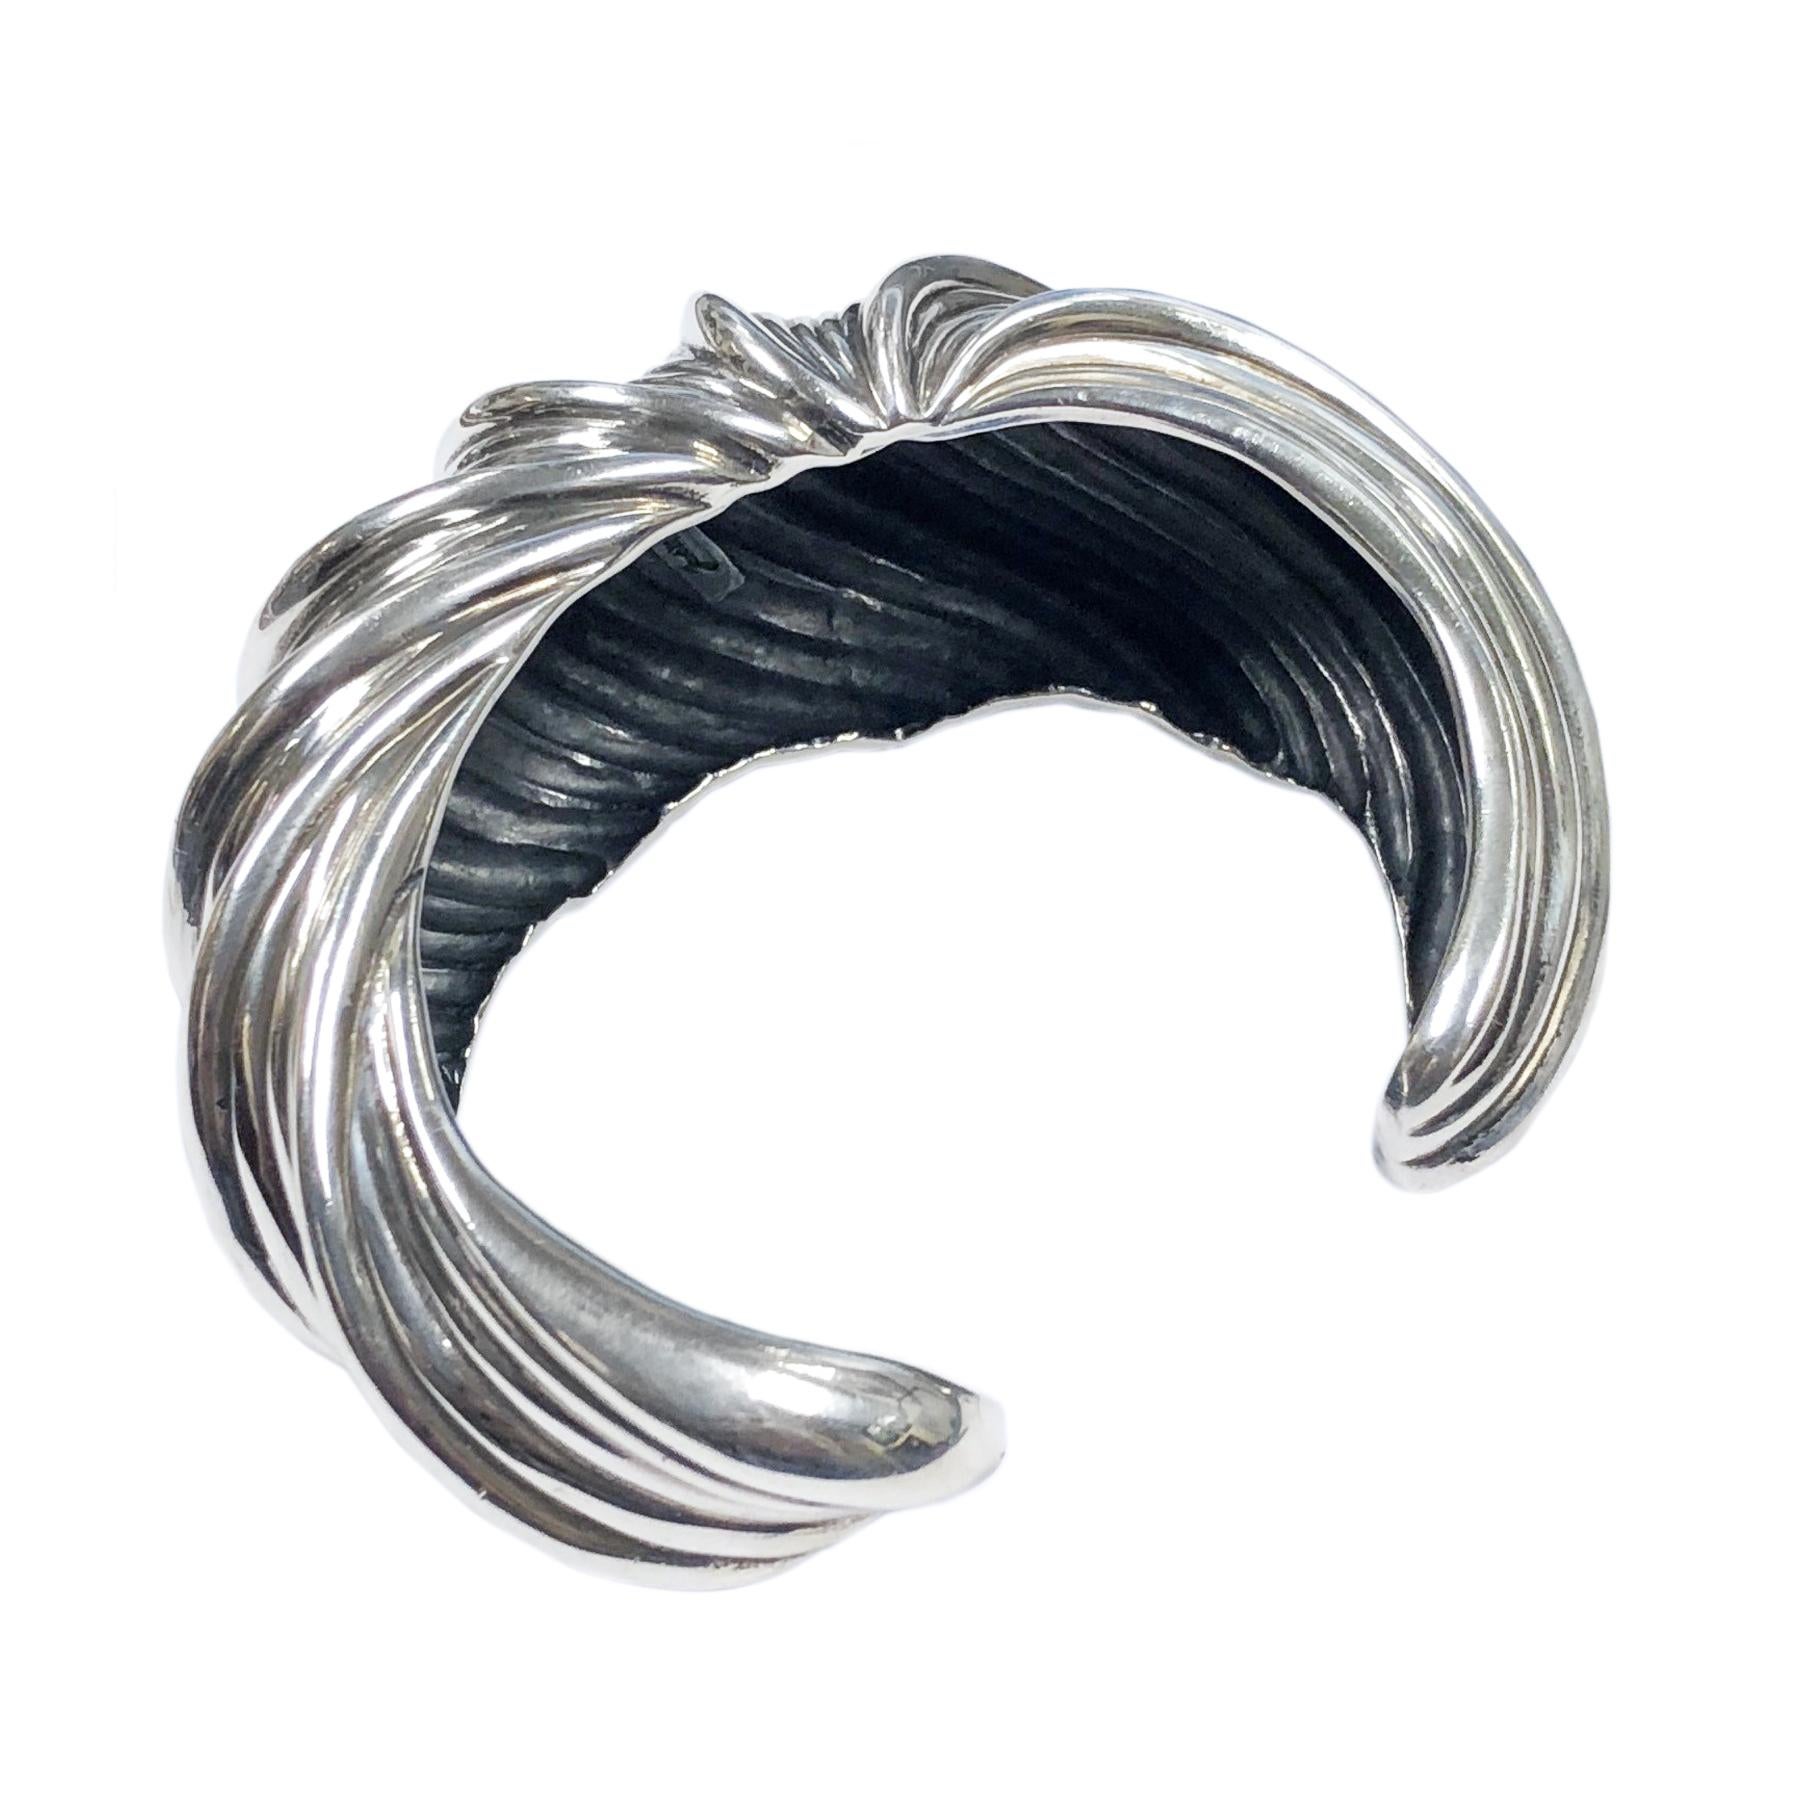 Circa 1990 Judith Leiber Sterling Silver Cuff Bracelet, Solid and Heavy and having a ribbed design and measuring 1 1/4 inch wide with a 1 inch wide opening and an inside measurement of  6 inches. 